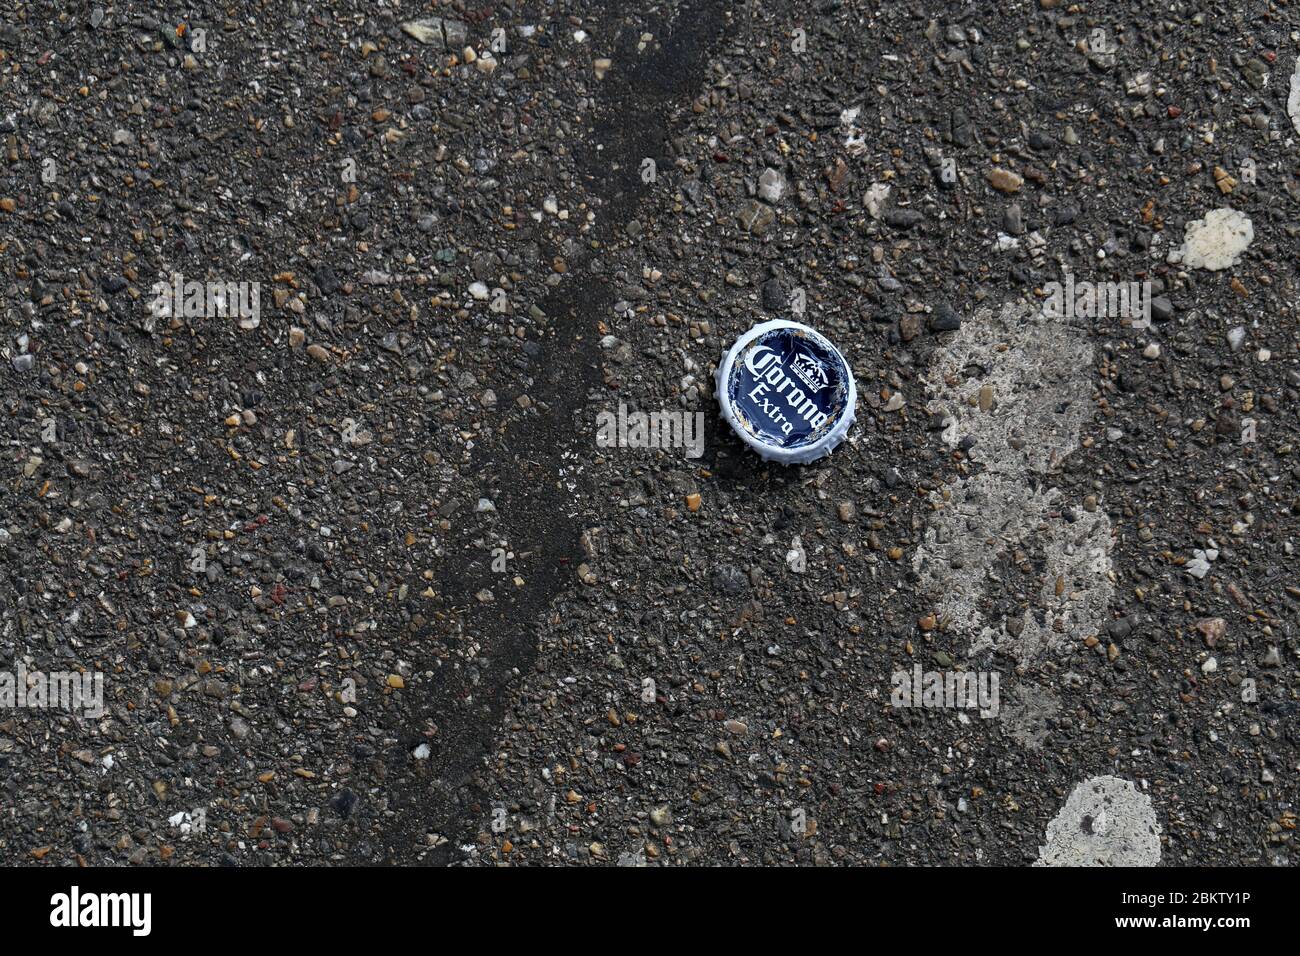 Corona beer bottle cap on an asphalt road, Zürich, Switzerland, March 2020. Photographed from above. Stock Photo